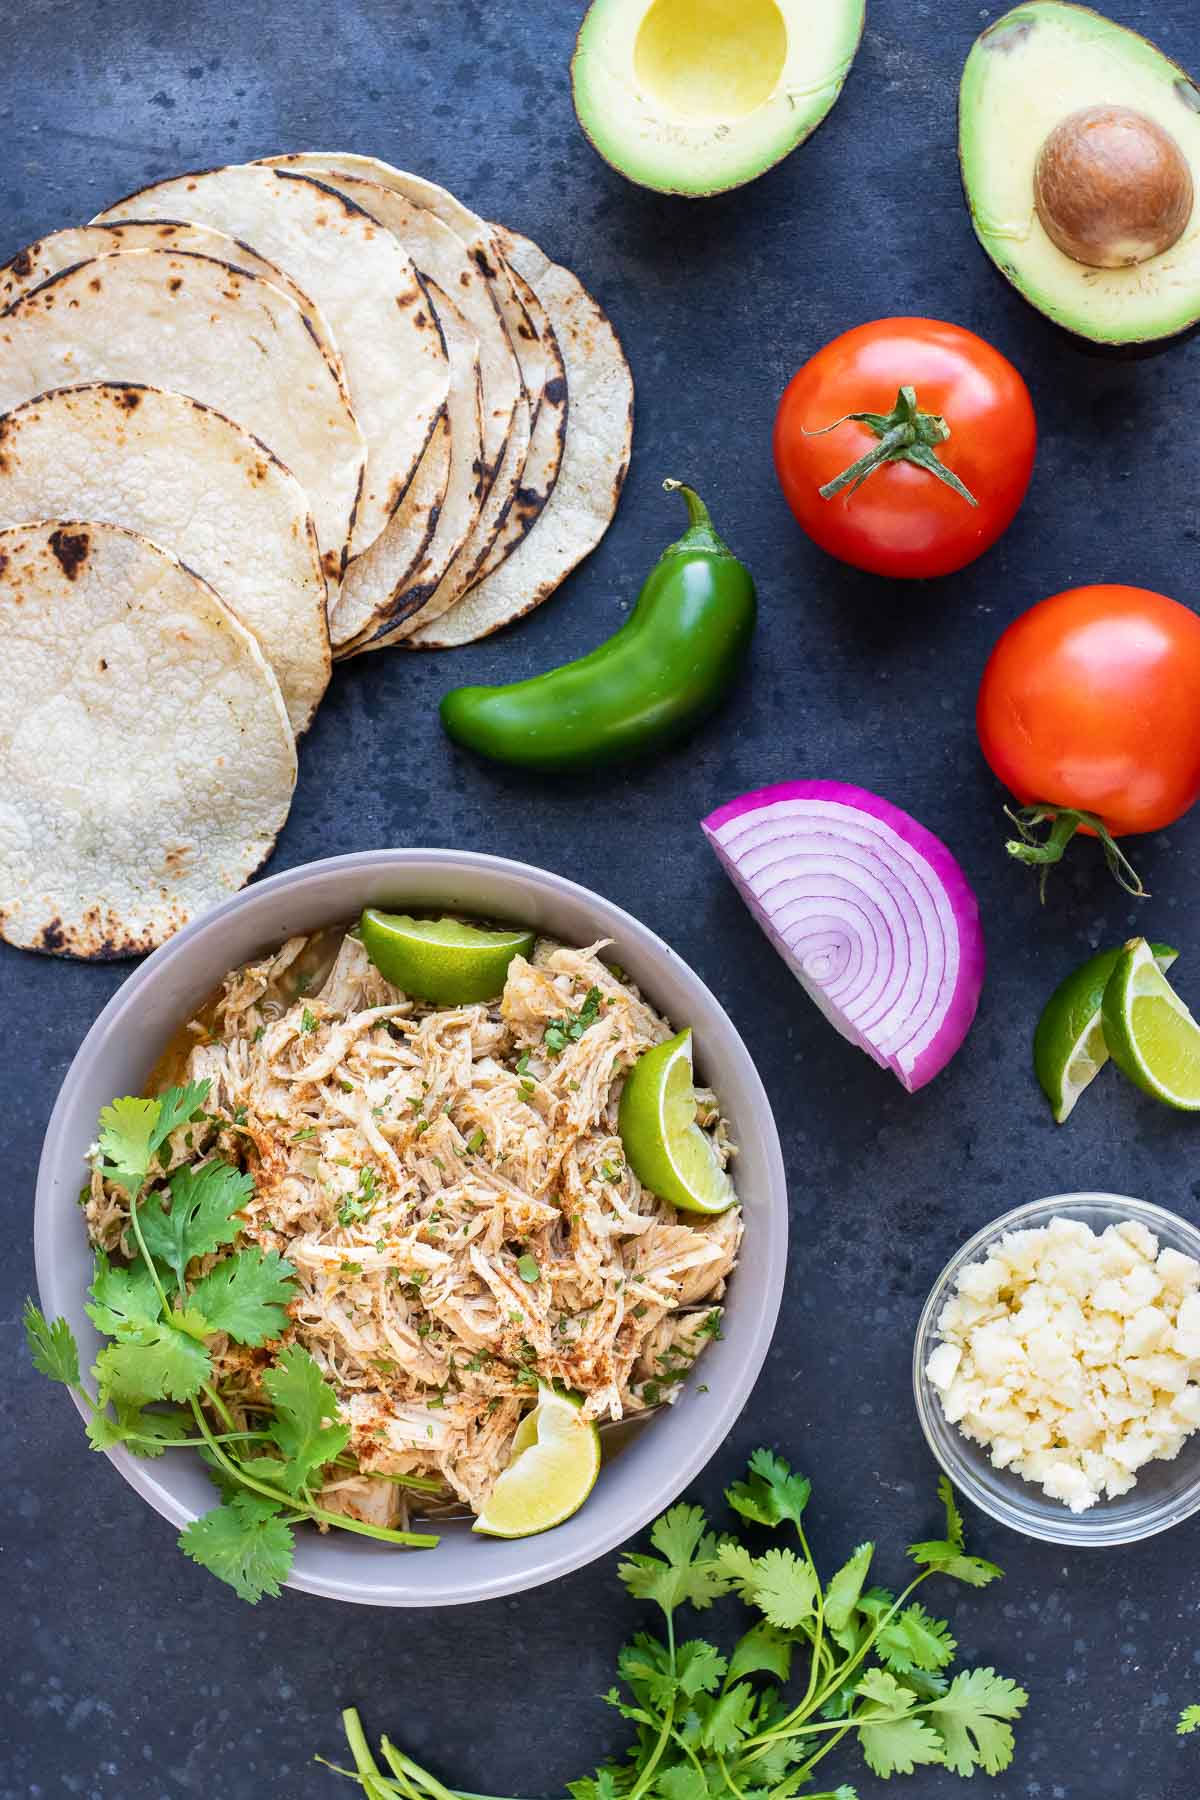 Tortillas, avocado, tomato, shredded chicken, and Cotija cheese as the ingredients for an easy chicken taco recipe.